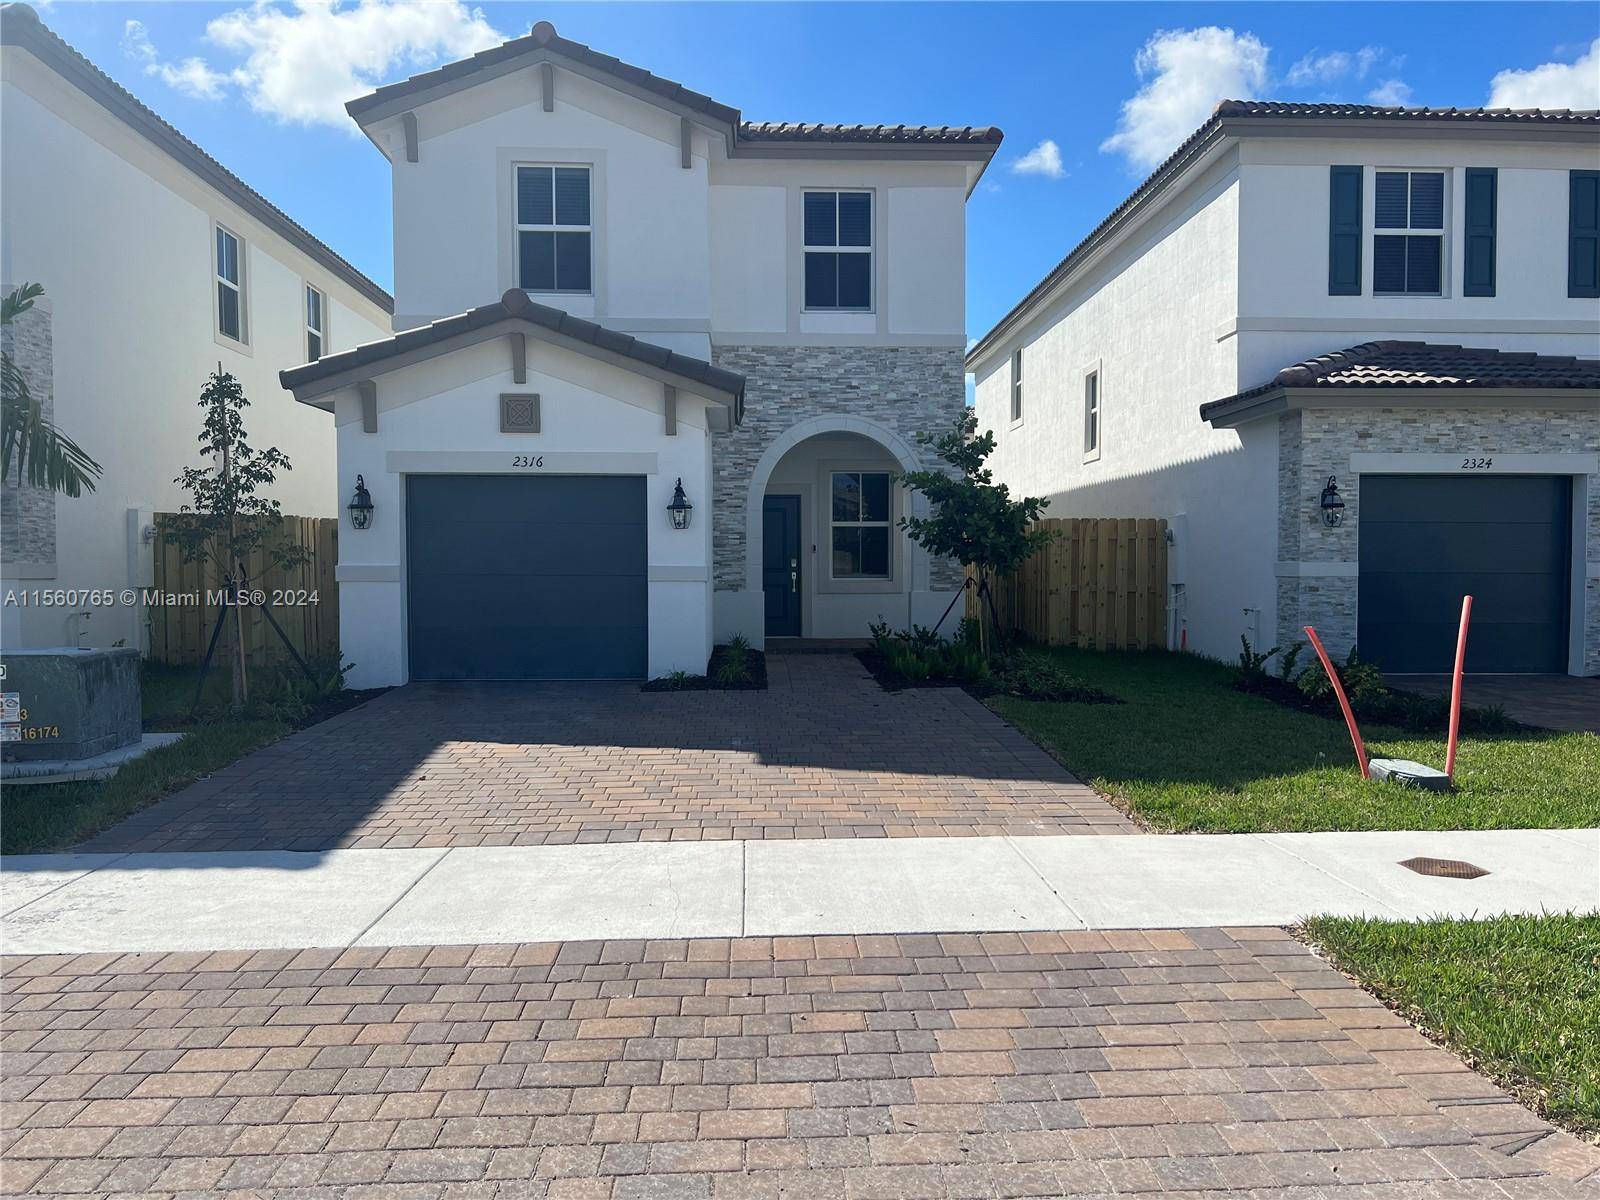 New single home with big fence patio at Westview North, easy access to the major highways, wonderful new gated community with club house.